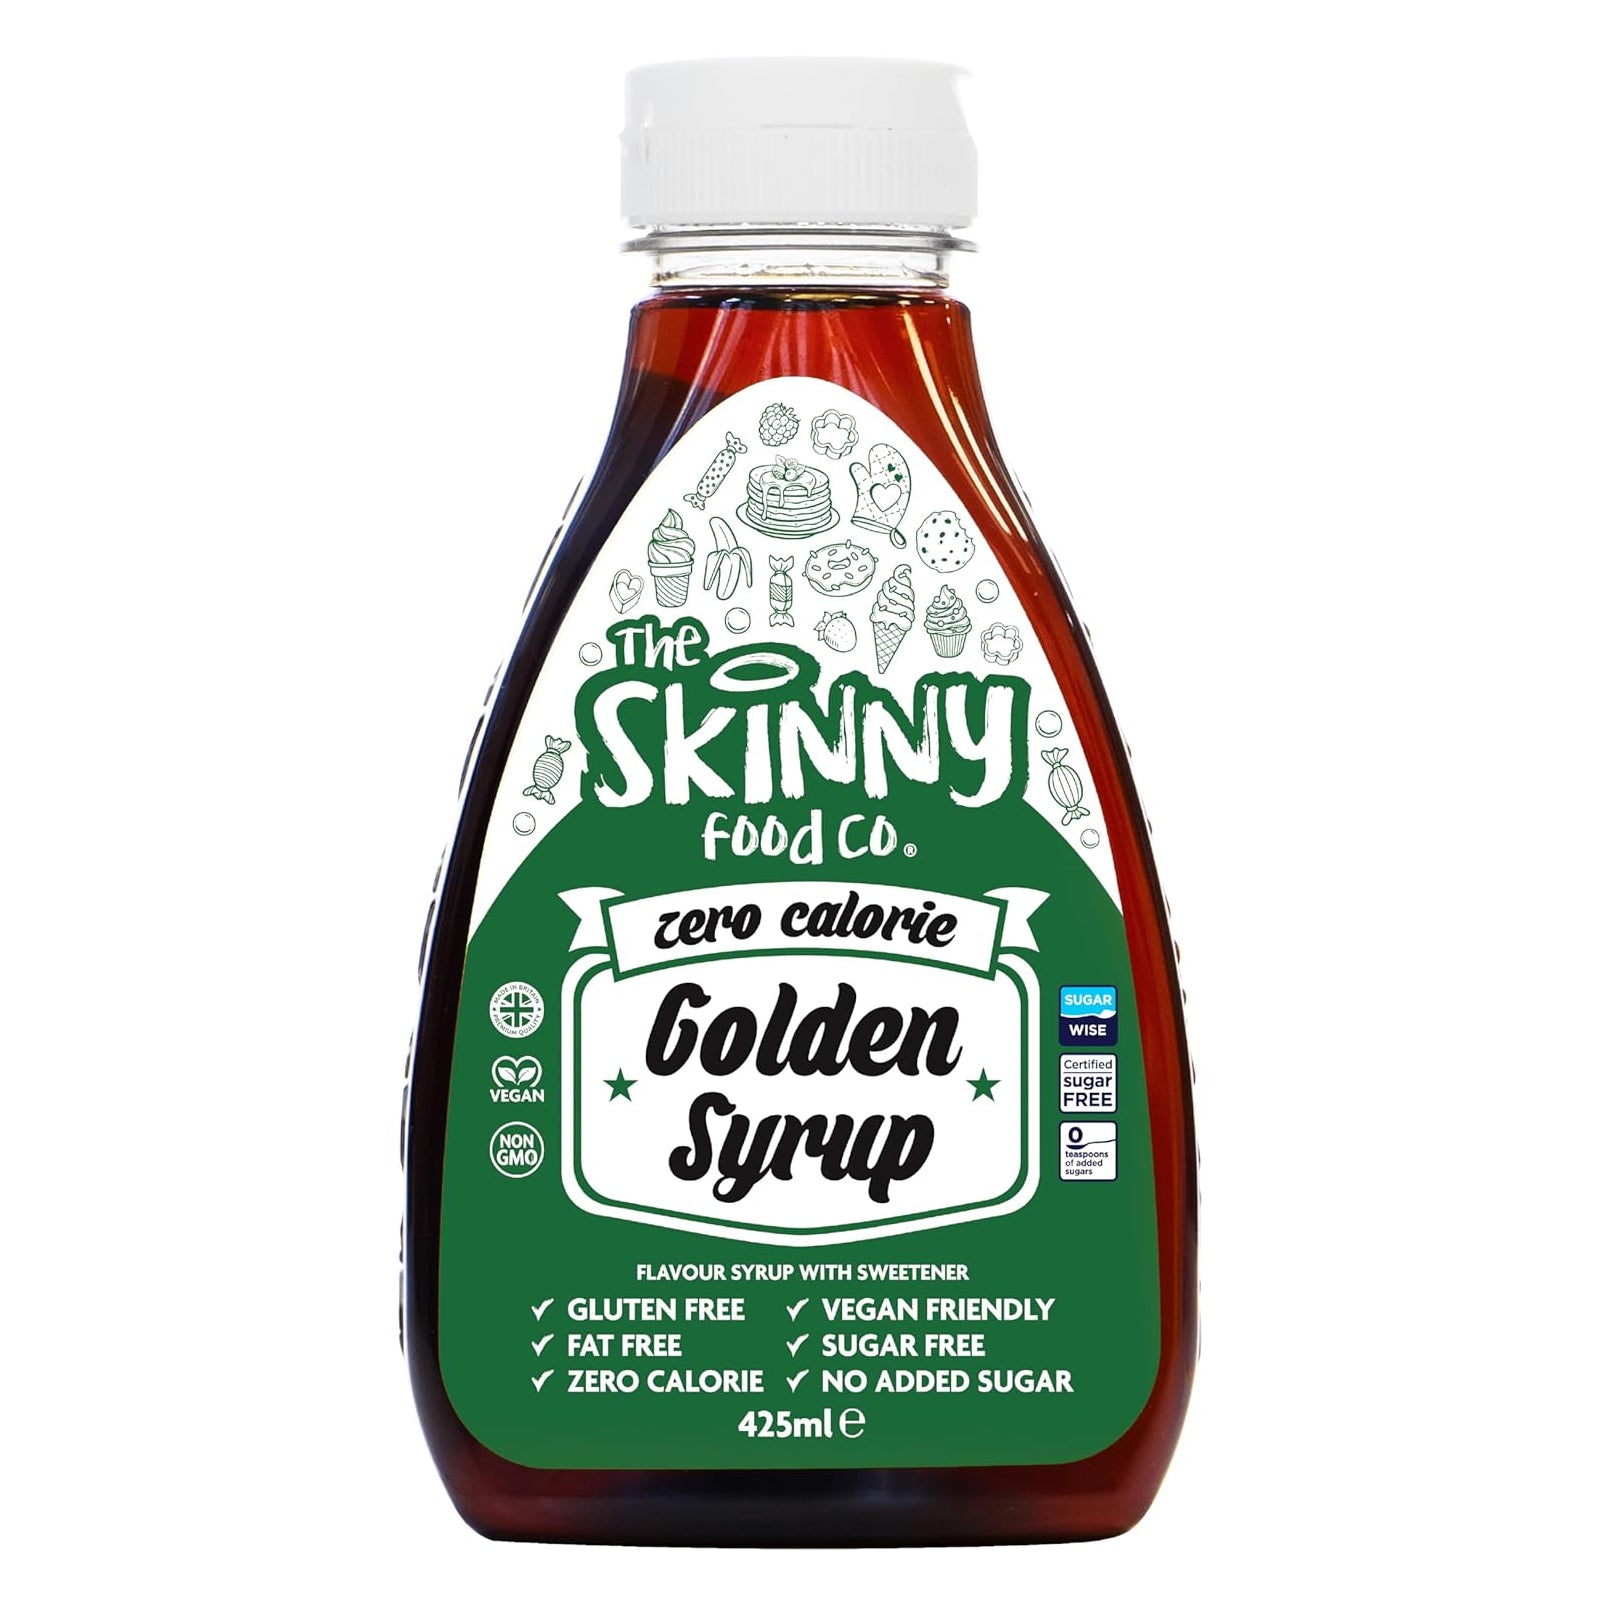 The Skinny Food Co. Zero Calorie Syrup Golden Syrup / 425ml